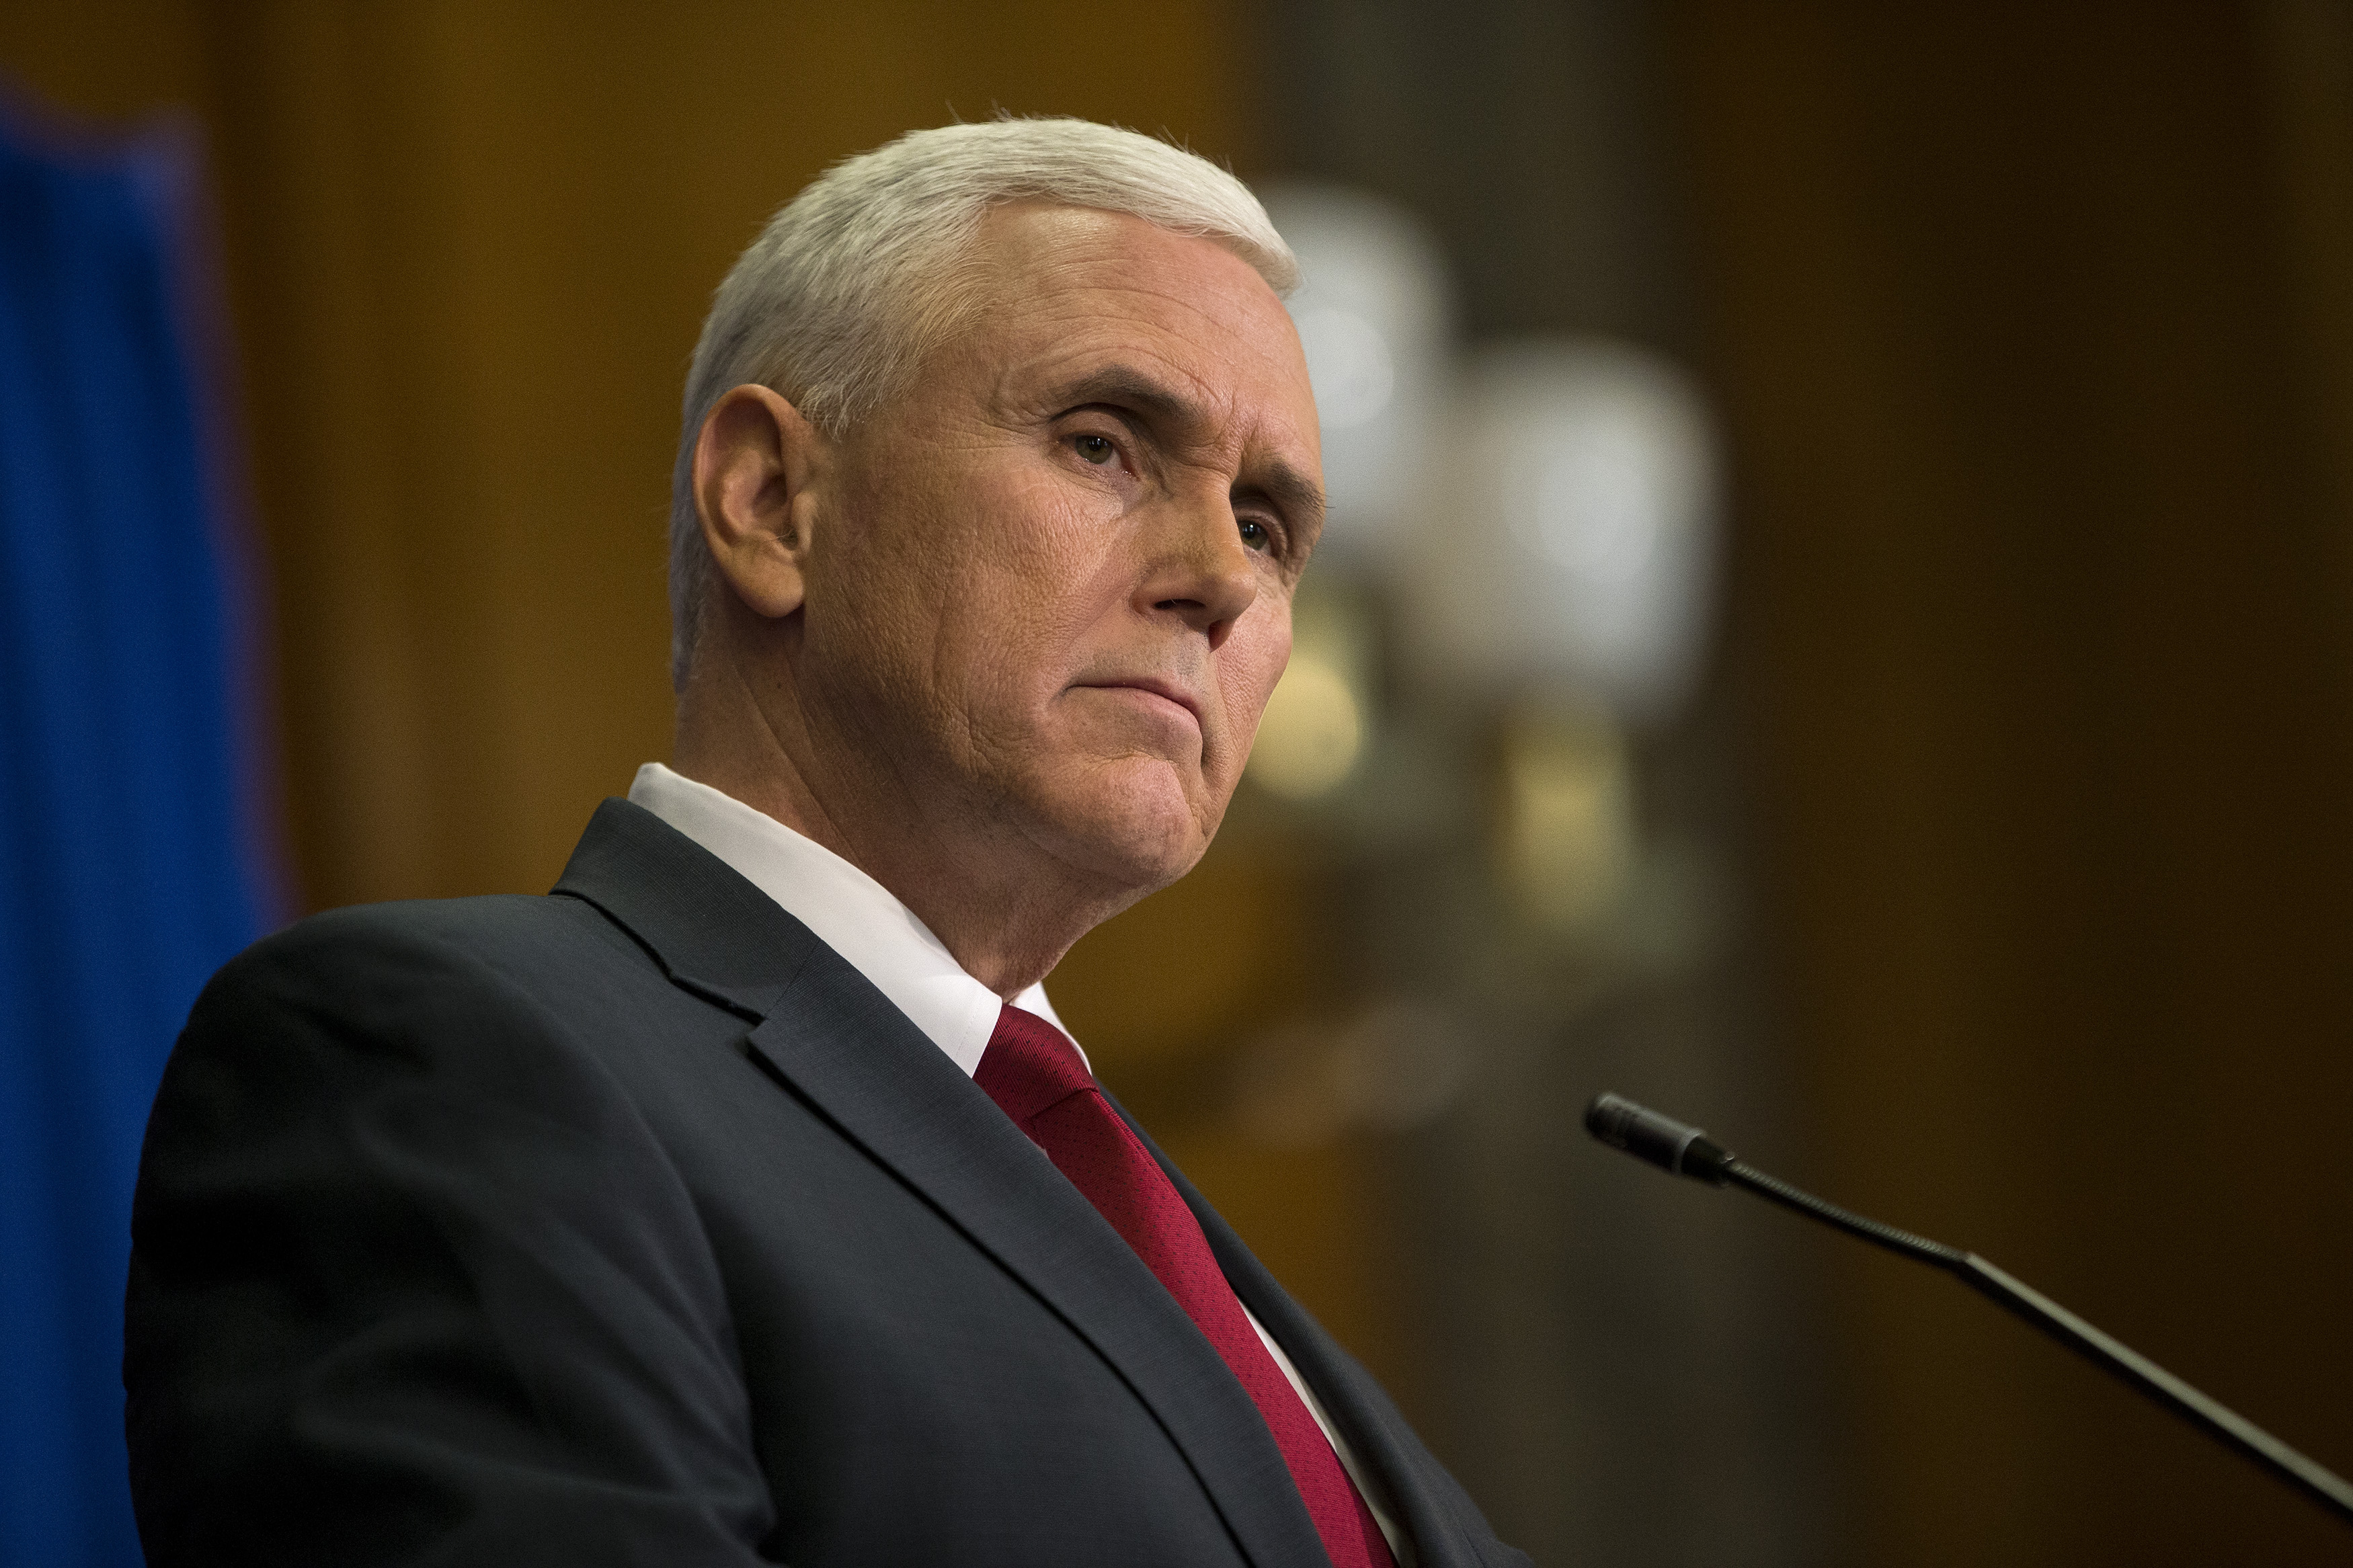 Indiana Gov. Mike Pence speaks during a press conference March 31, 2015. (Getty)